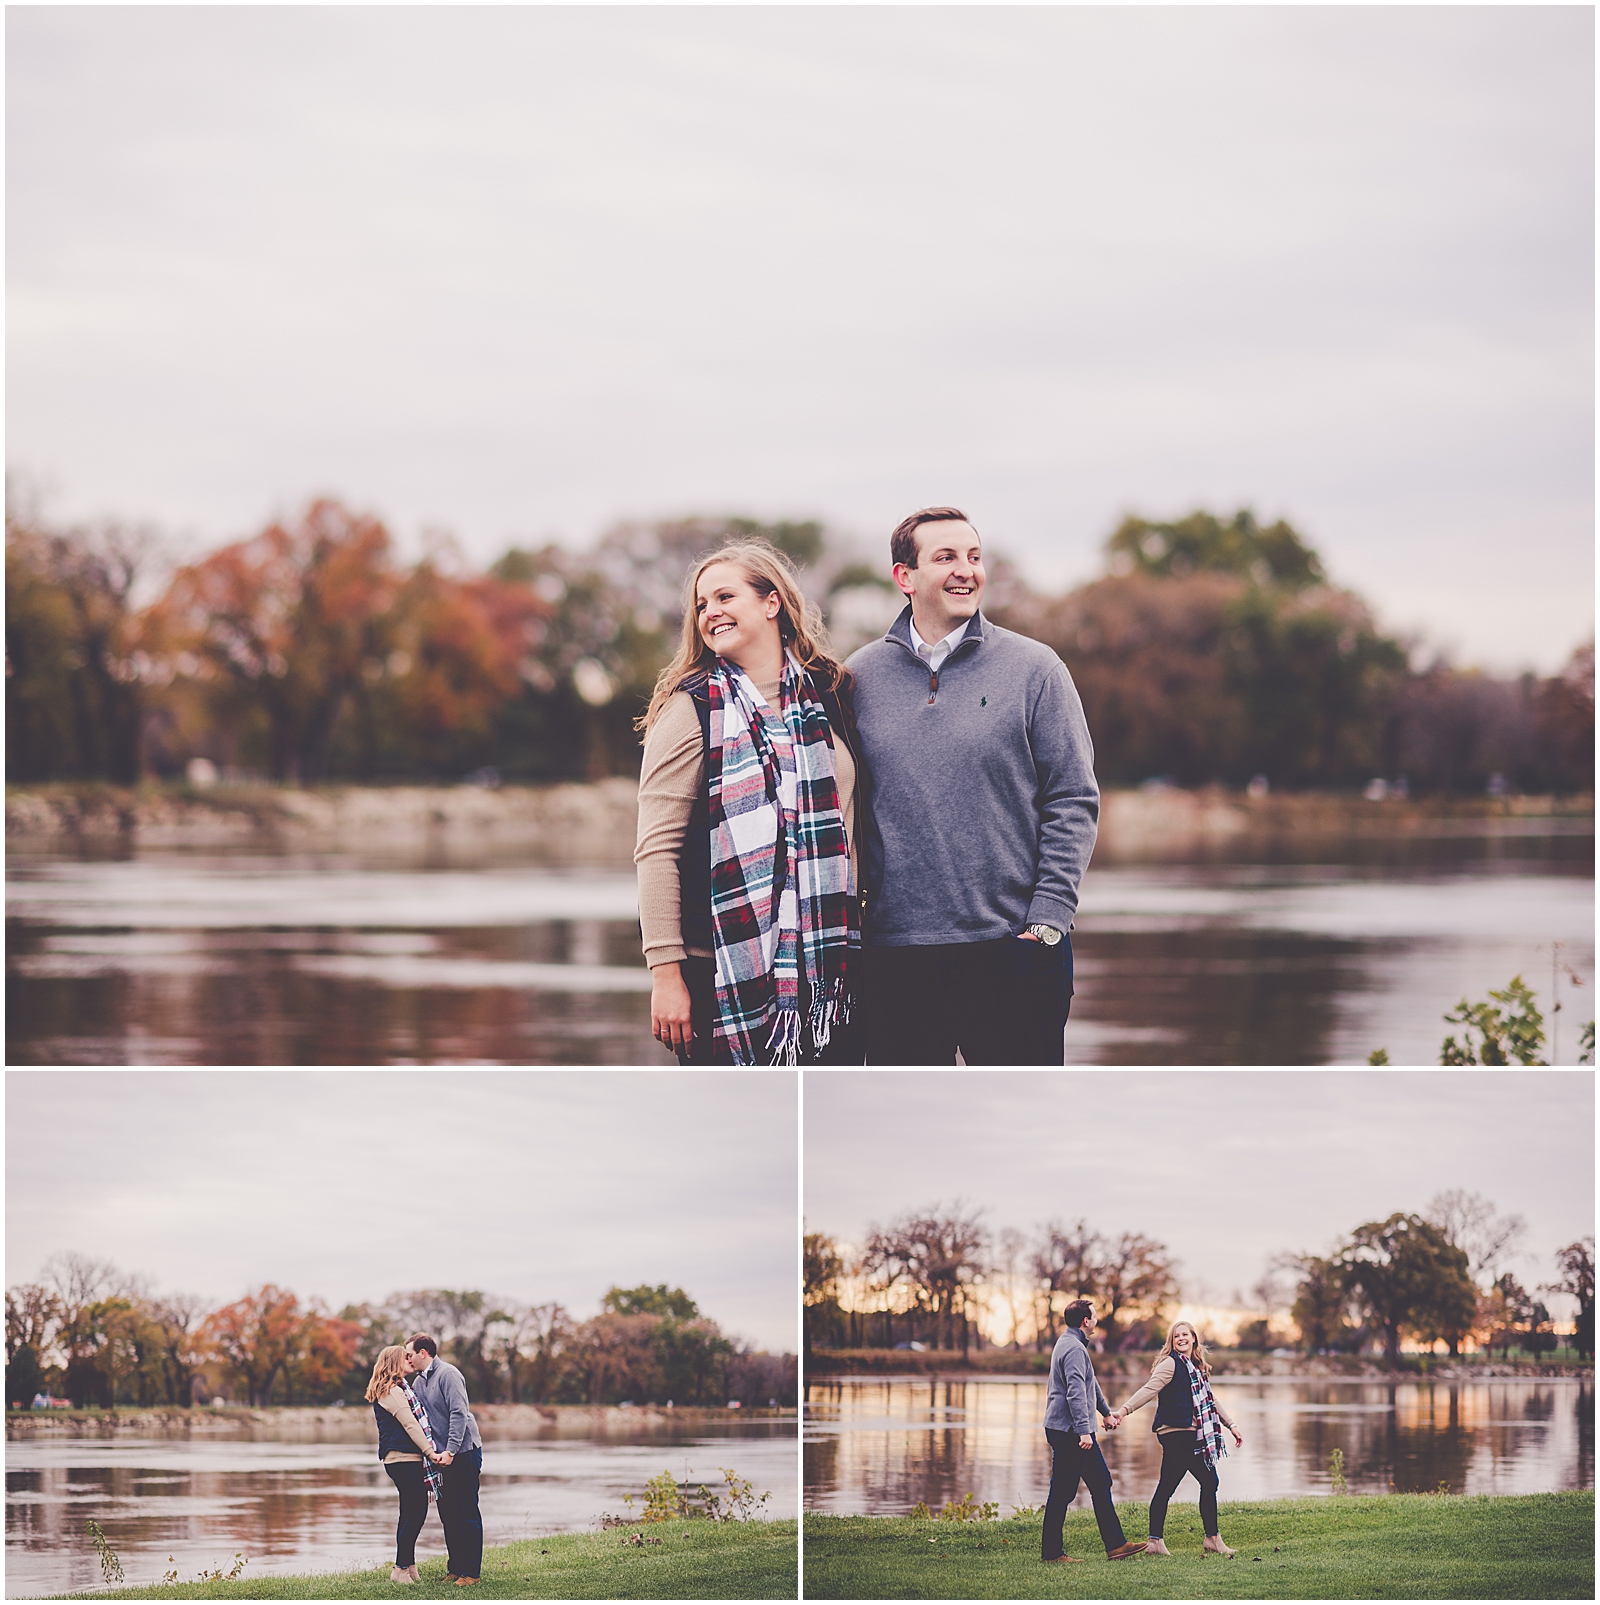 Meredith and Ryan's downtown Kankakee engagement photos and Kankakee Country Club engagement session in Kankakee with Chicagoland photographer Kara Evans Photographer.